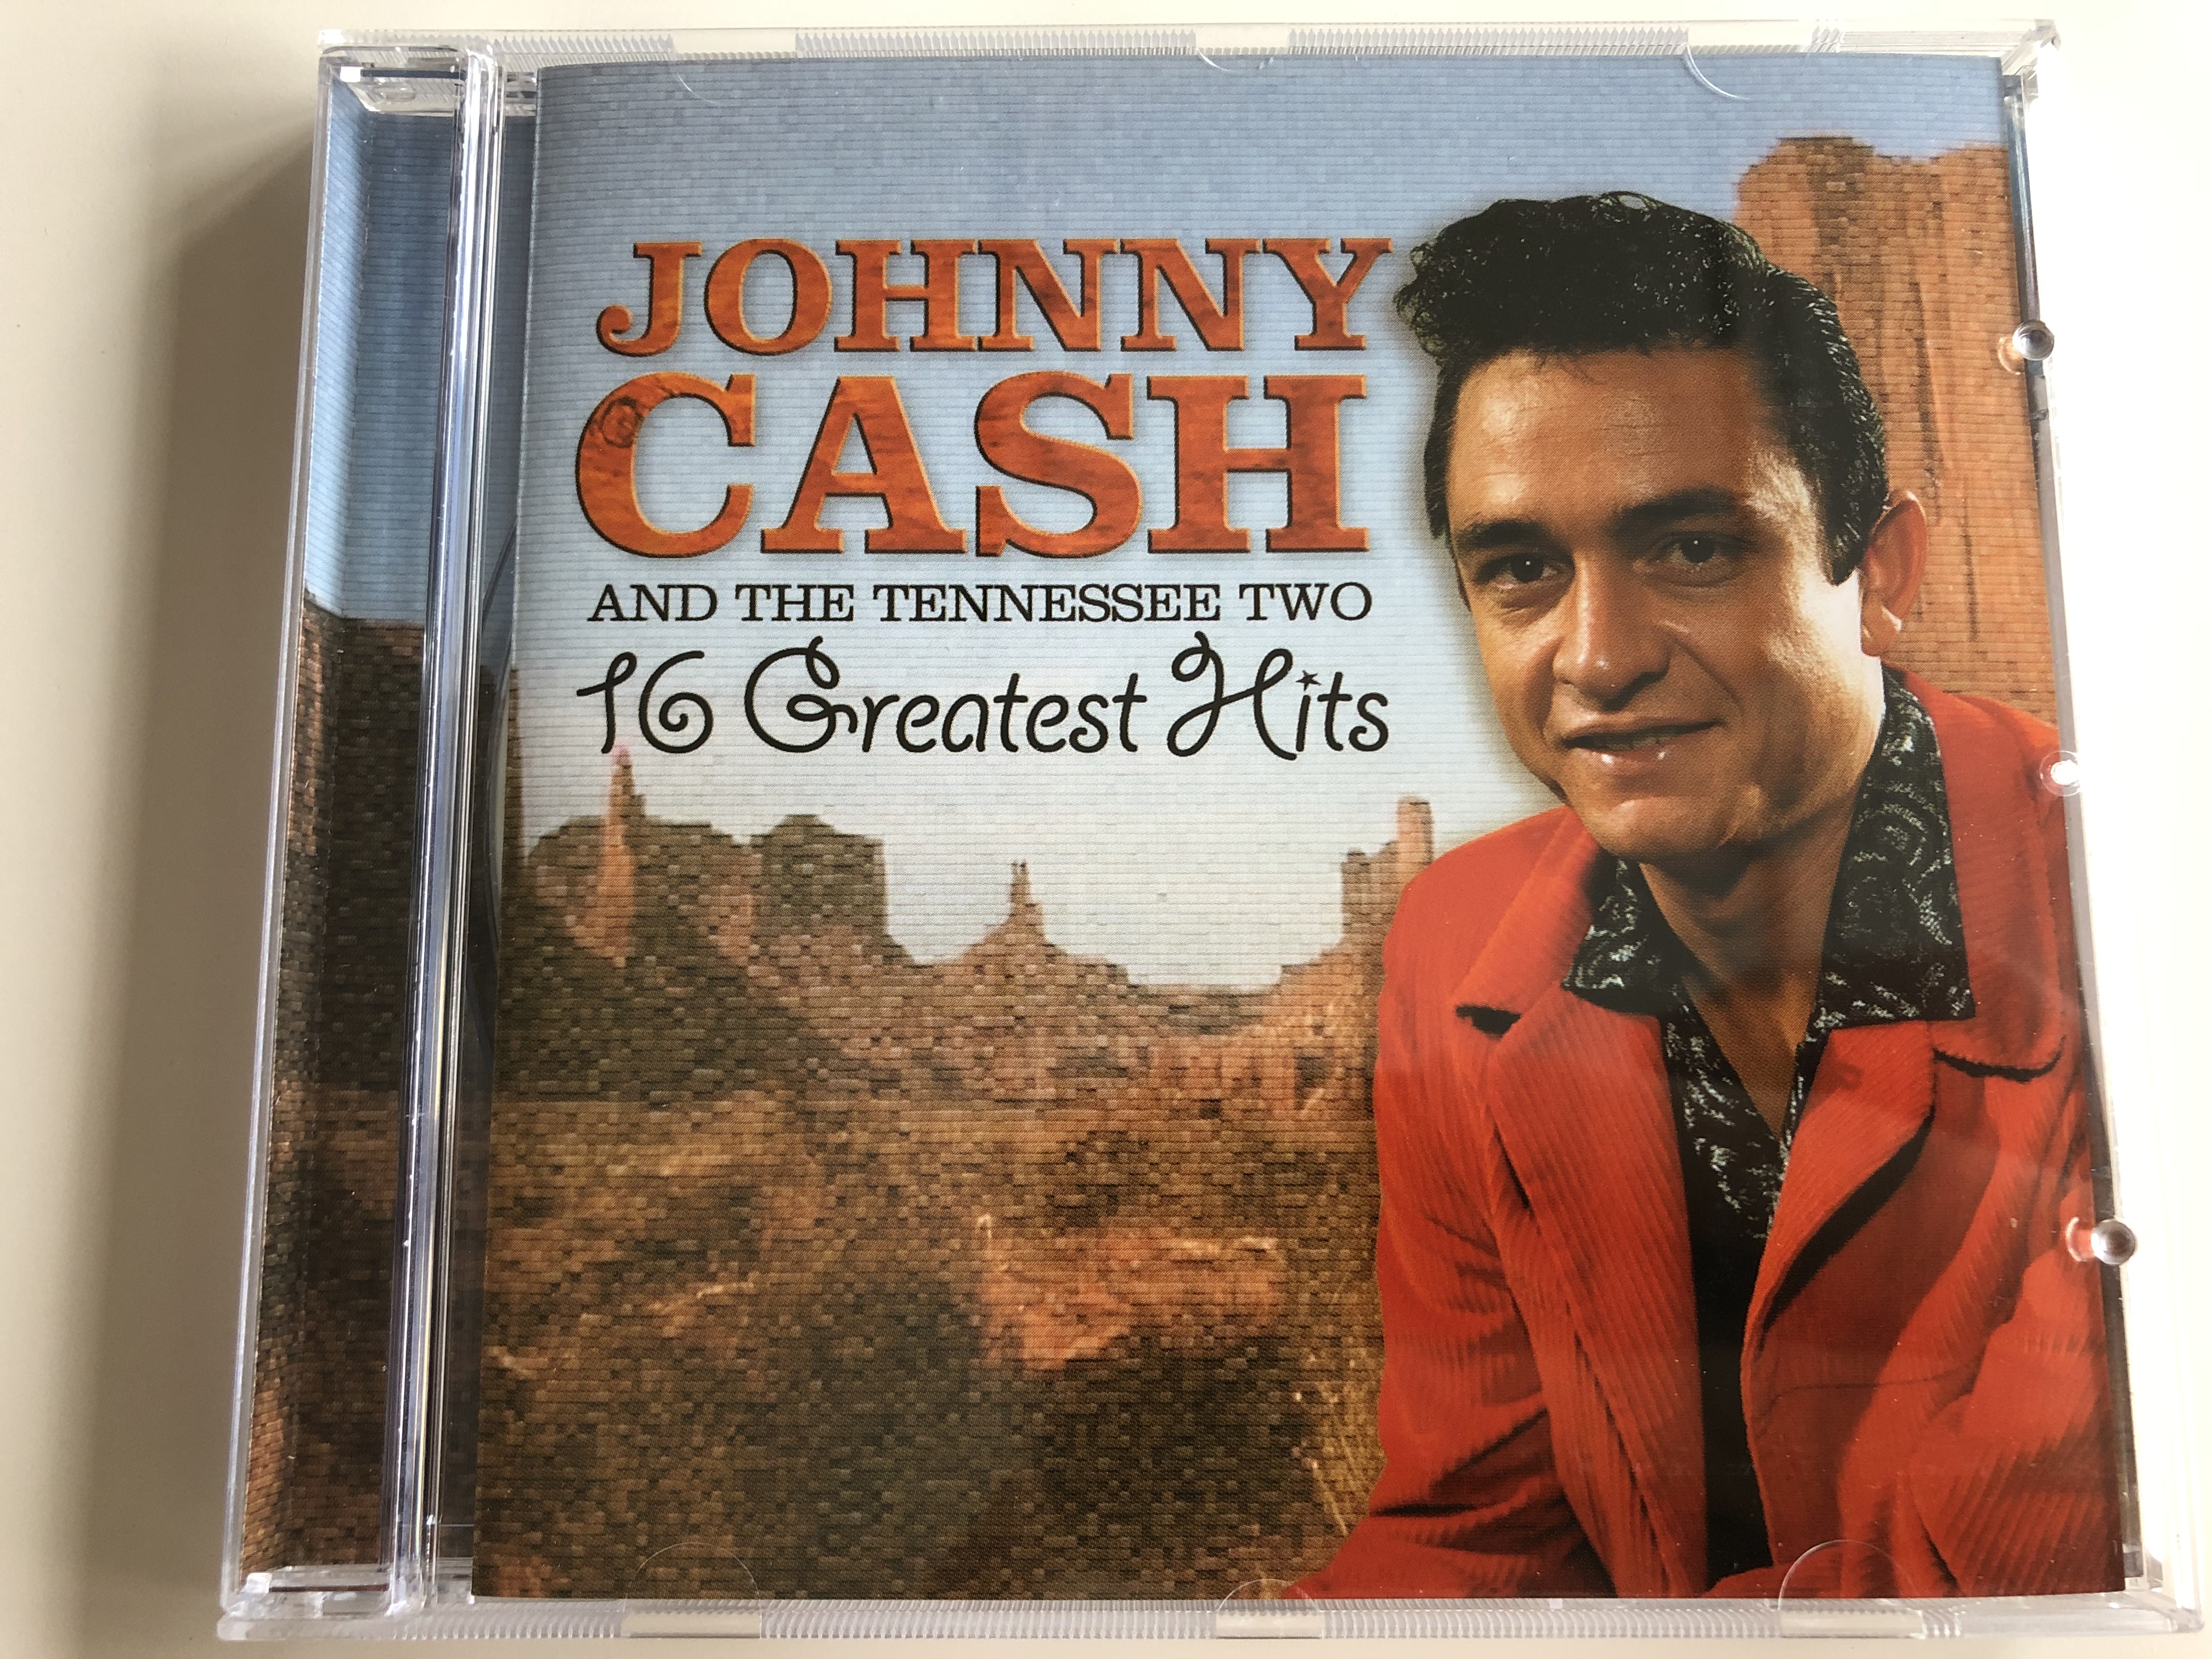 johnny-cash-and-the-tennessee-two-16-greatest-hits-ballad-of-a-teenage-queen-i-walk-the-line-folsom-prison-blues-luther-s-boogie-audio-cd-2005-10575-2-1-.jpg